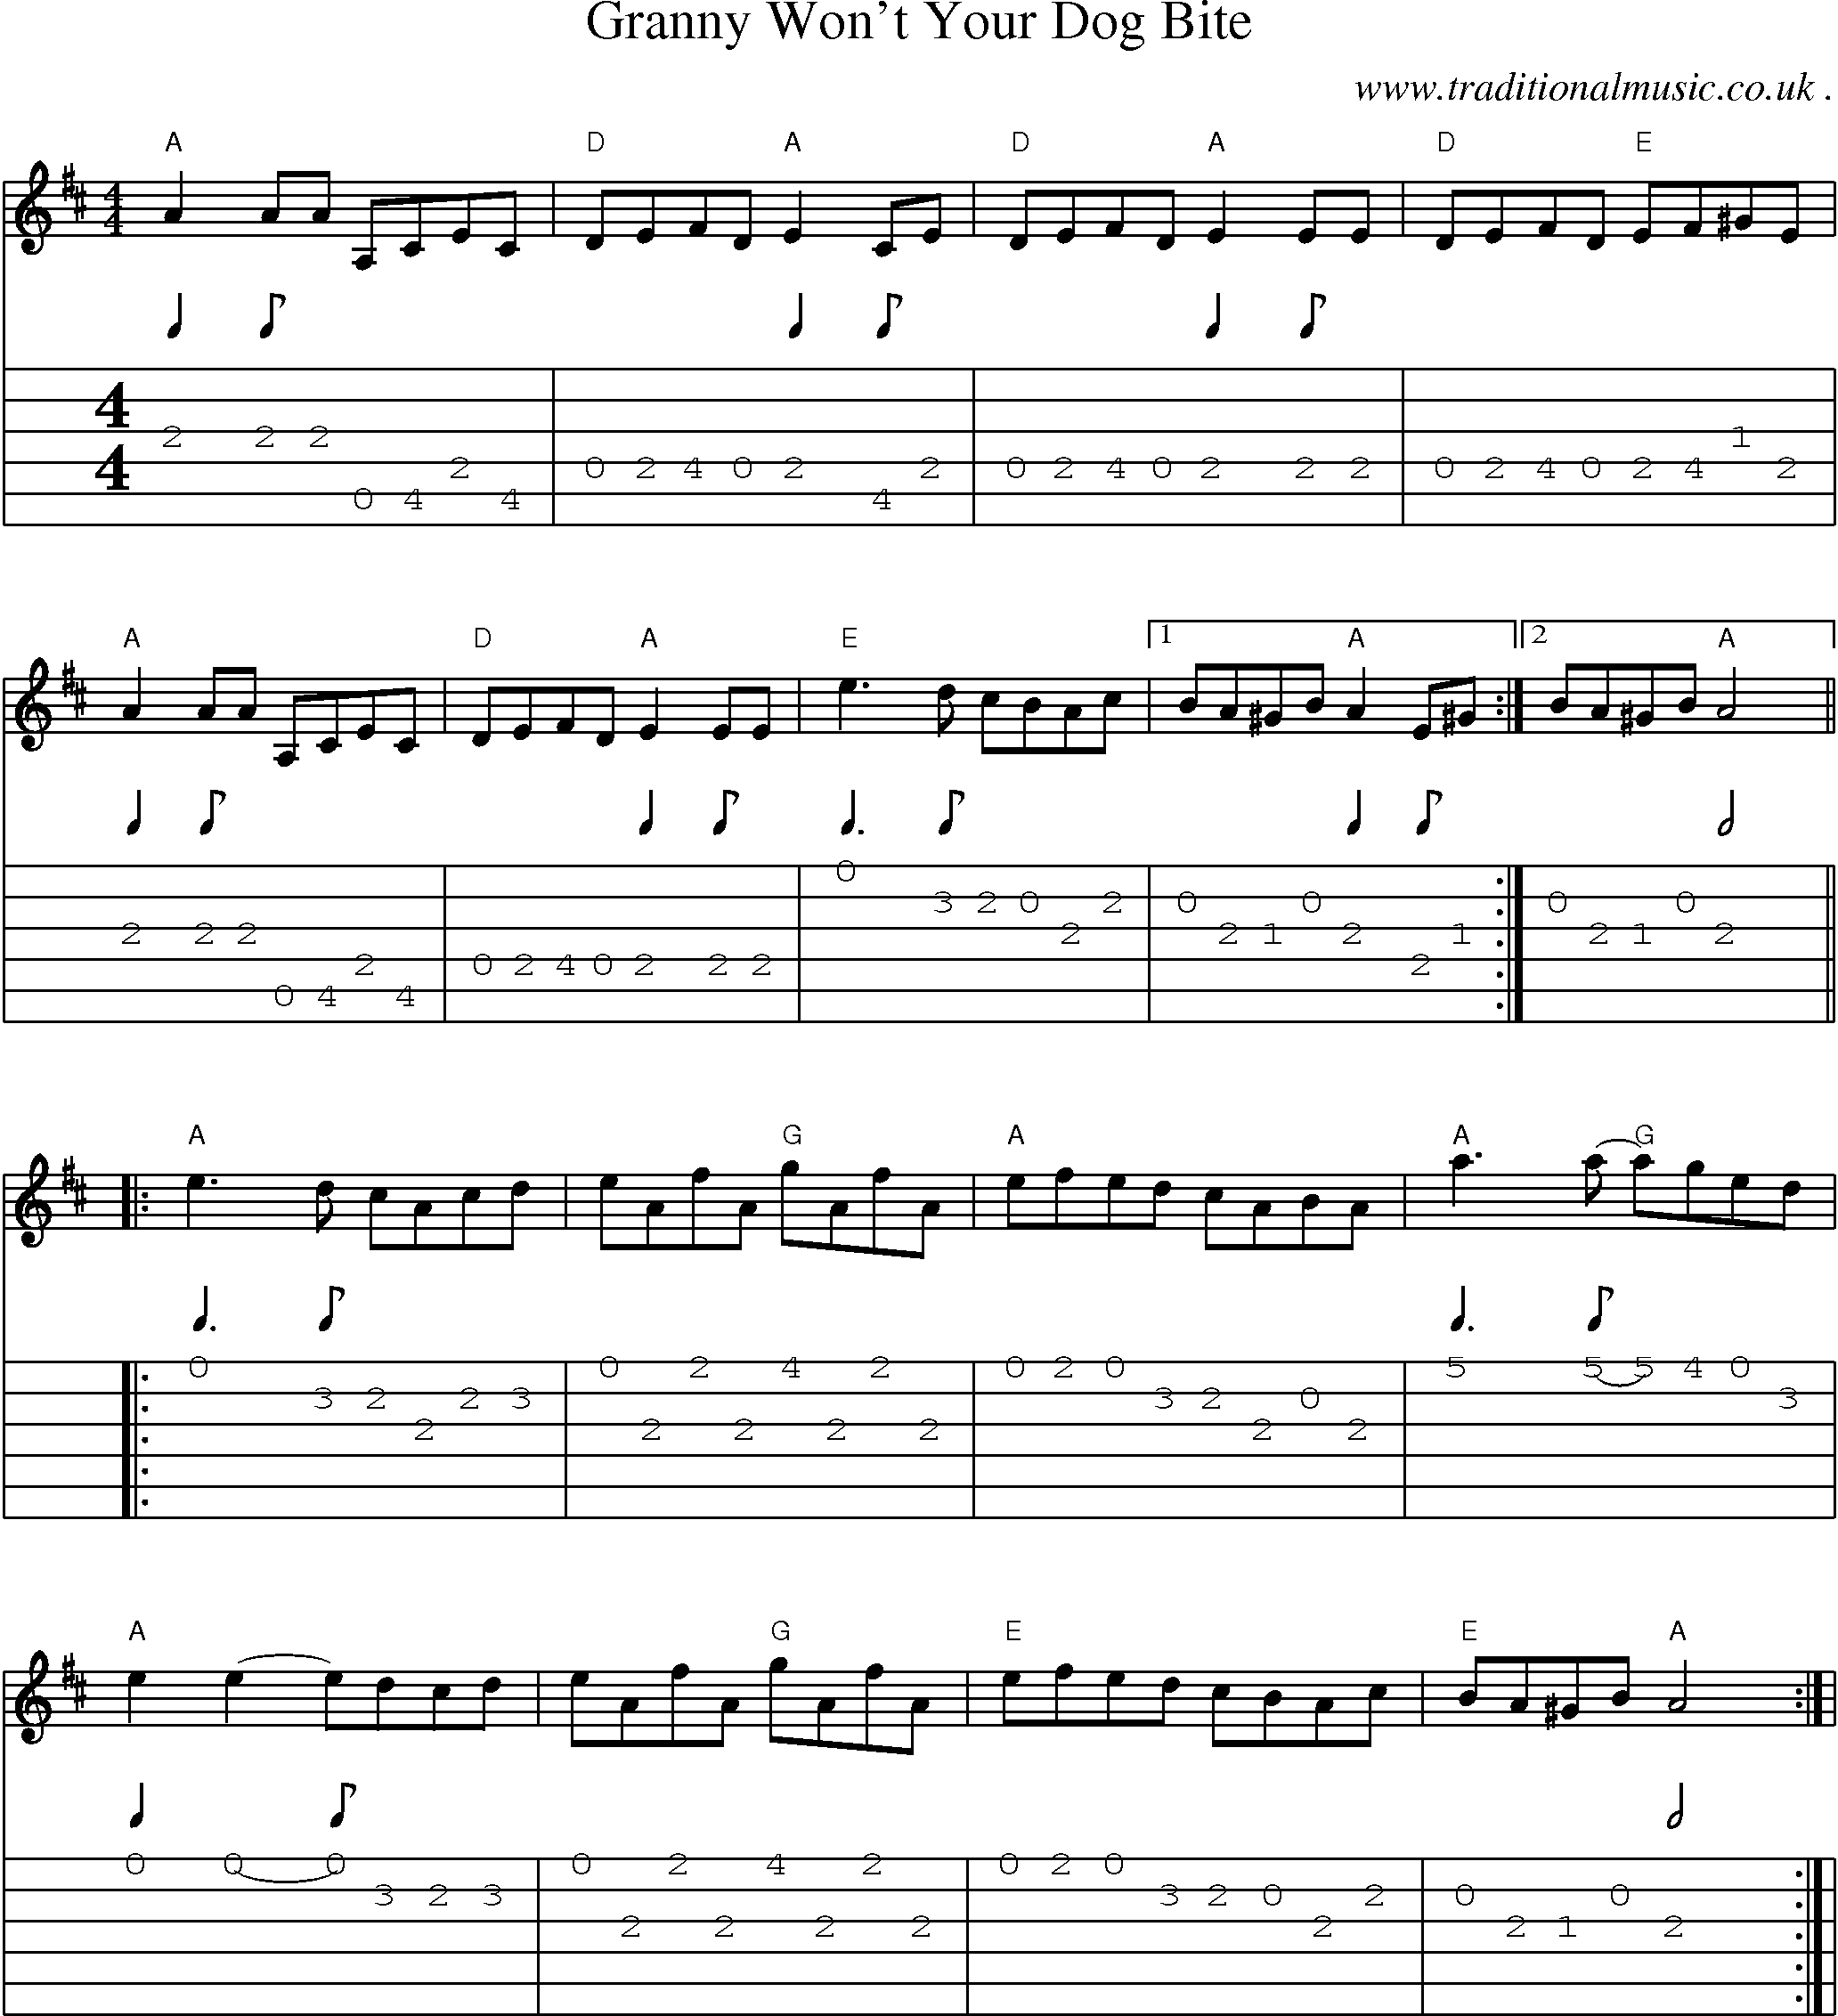 Music Score and Guitar Tabs for Granny Wont Your Dog Bite